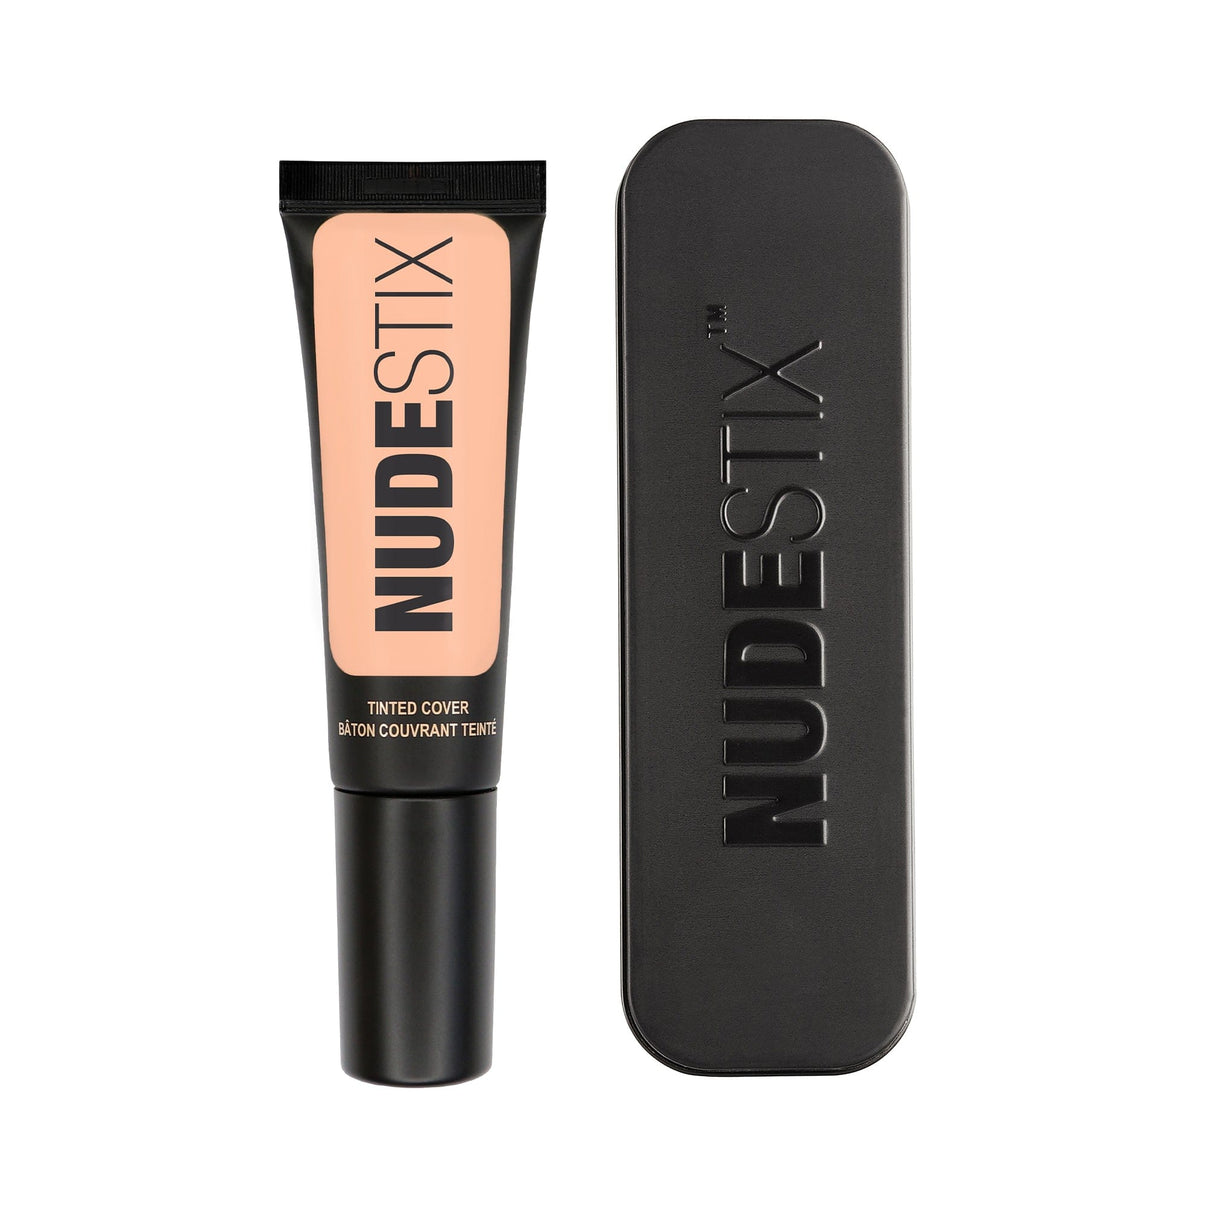 Tinted Cover Liquid Foundation in shade nude 3 with Nudestix can